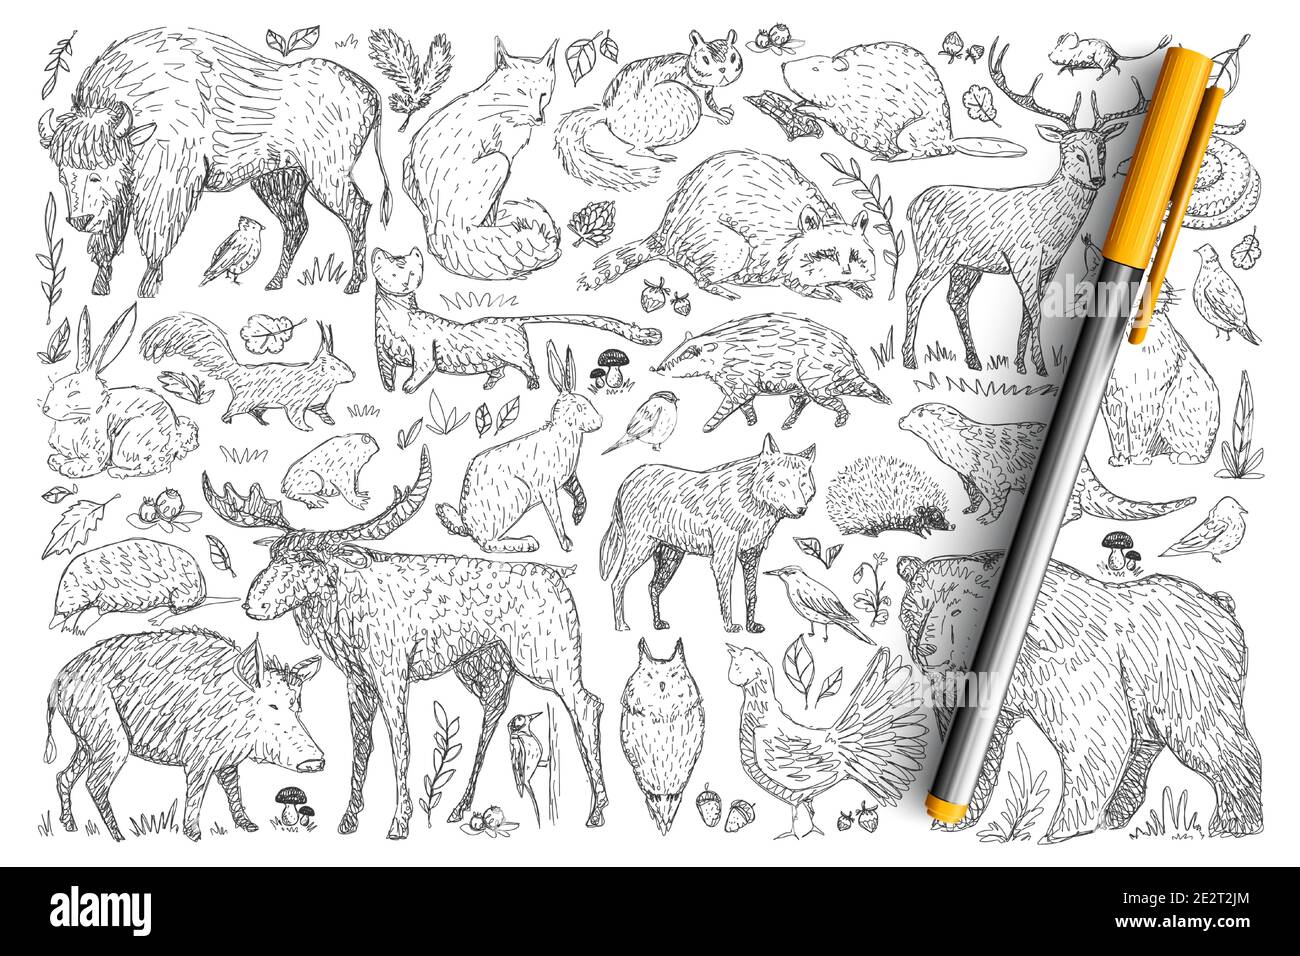 Forest wild animals doodle set. Collection of hand drawn deer fox bear rabbit squirrel raccoon buffalo hedgehog living in wild nature isolated on transparent background. Illustration of animals Stock Vector